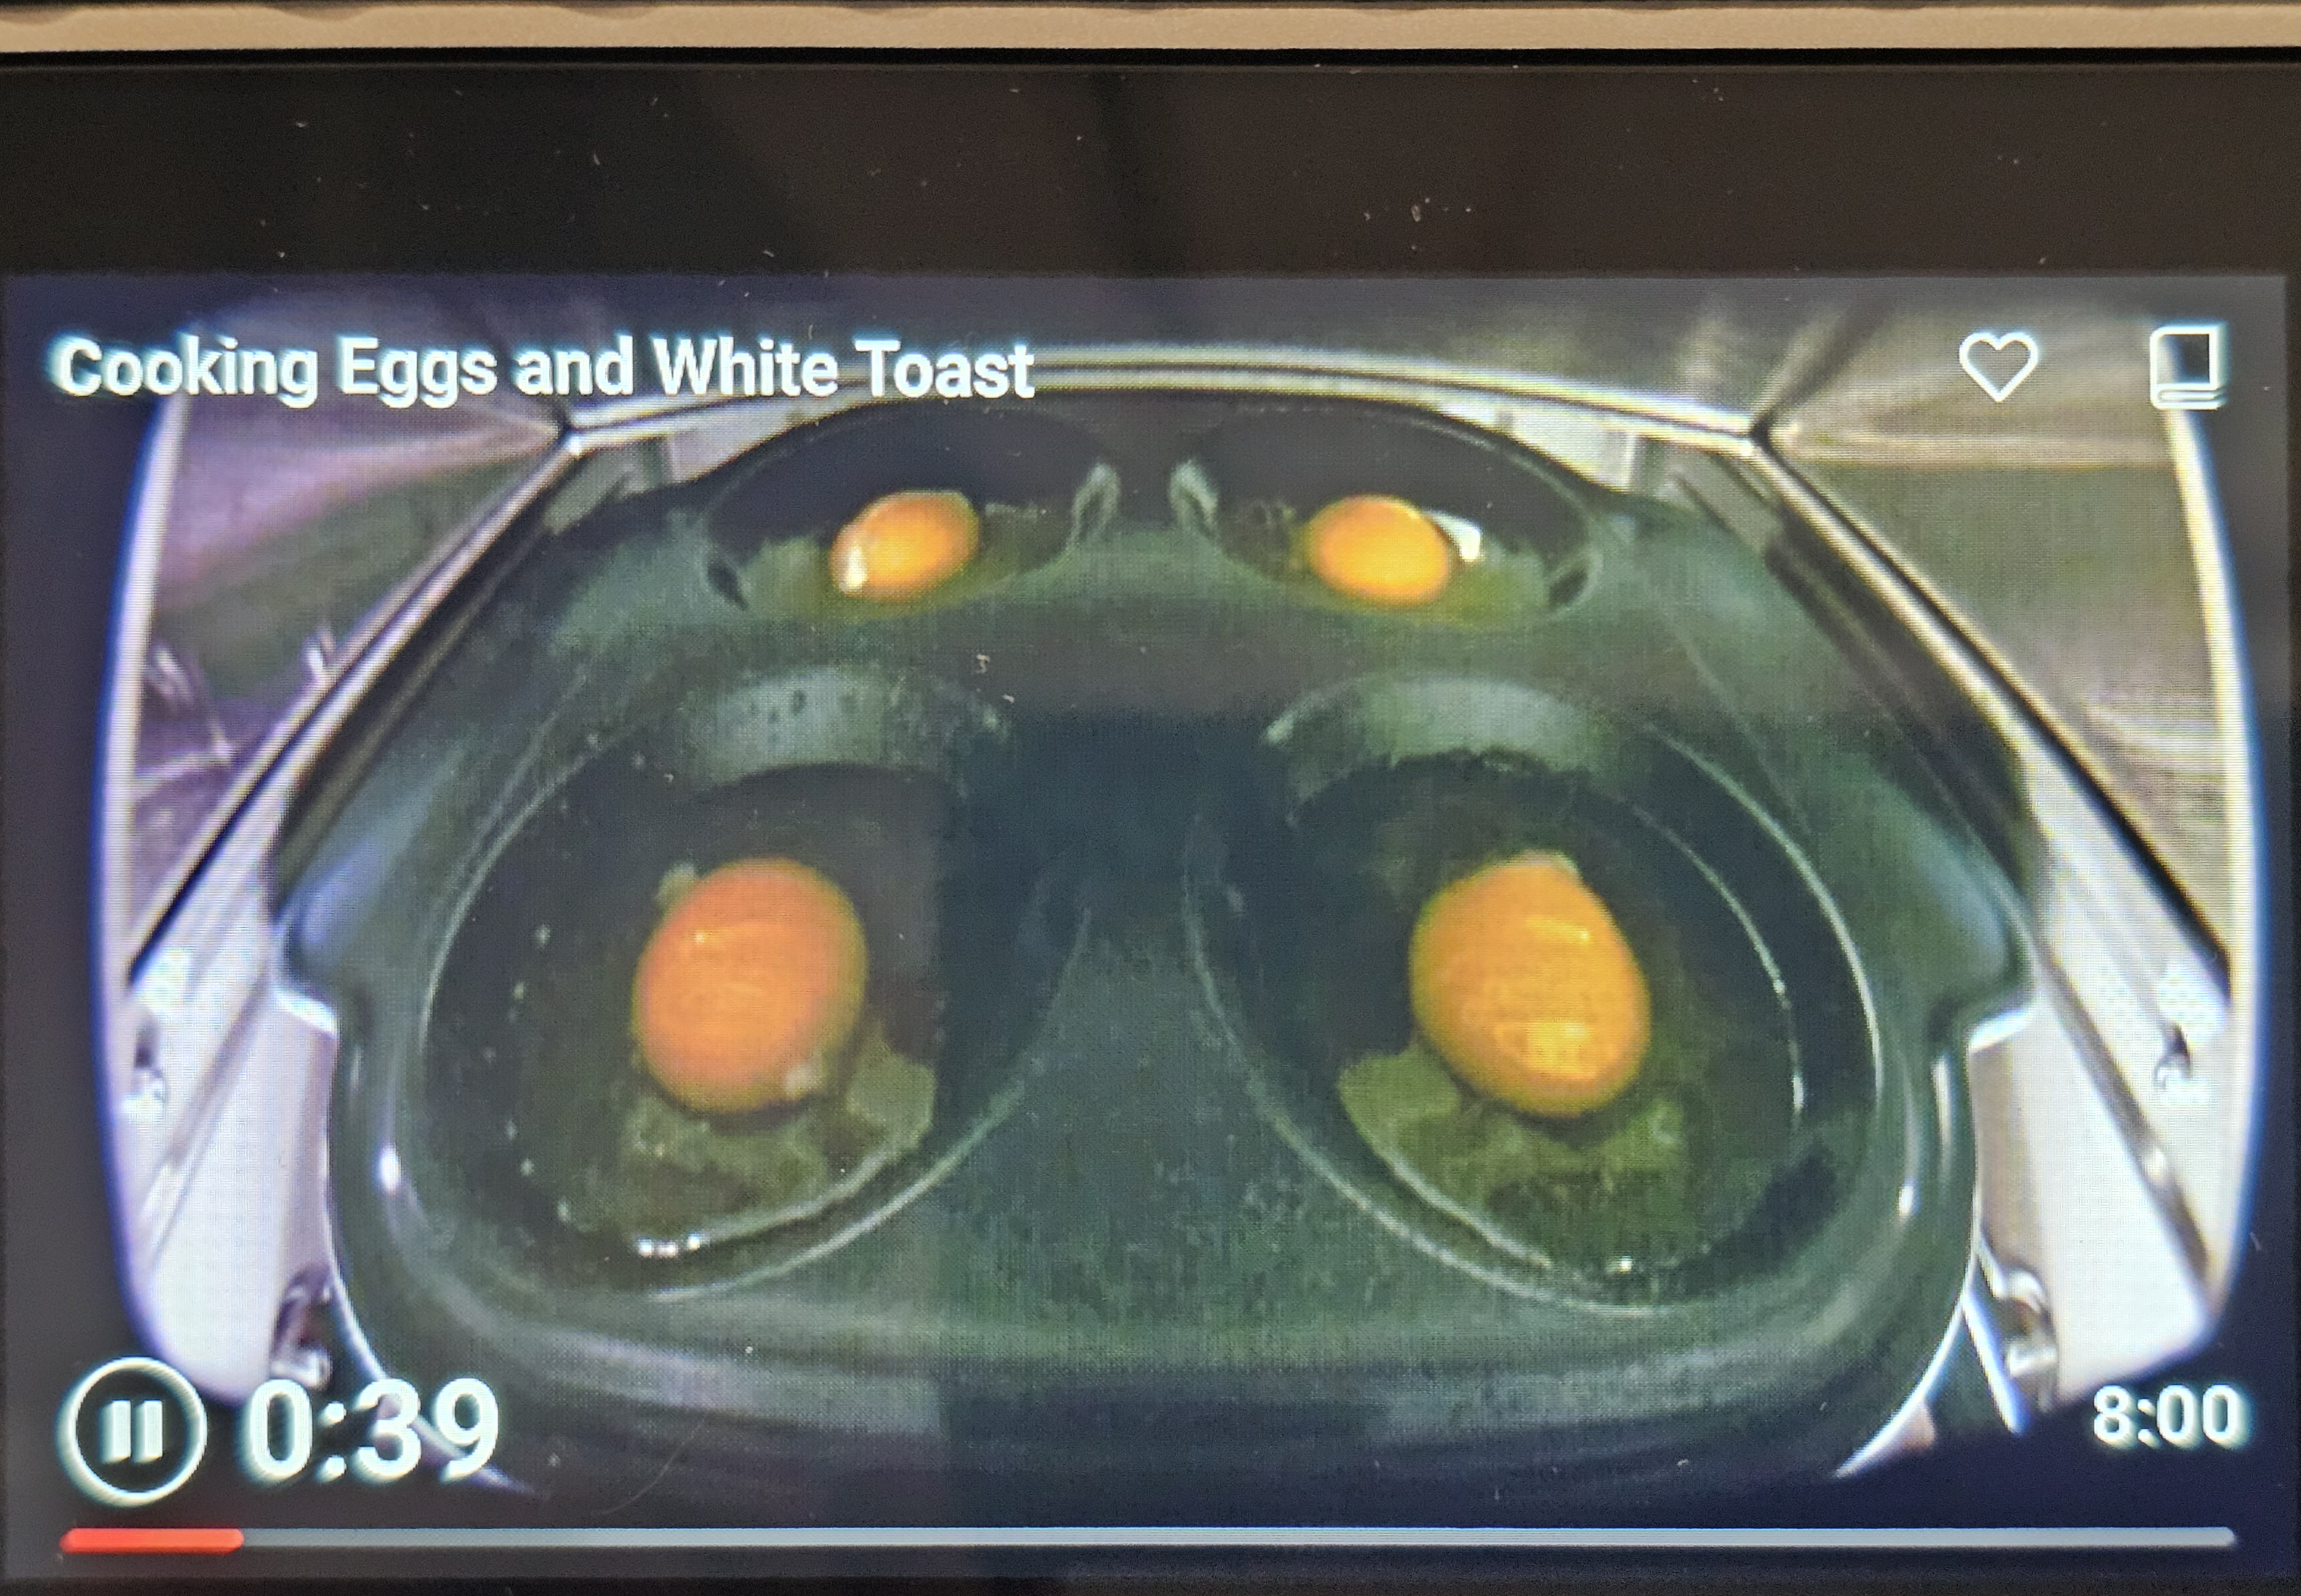 Brava Oven display showing four eggs being cooked with text overlay of "Cooking Eggs and White Toast"